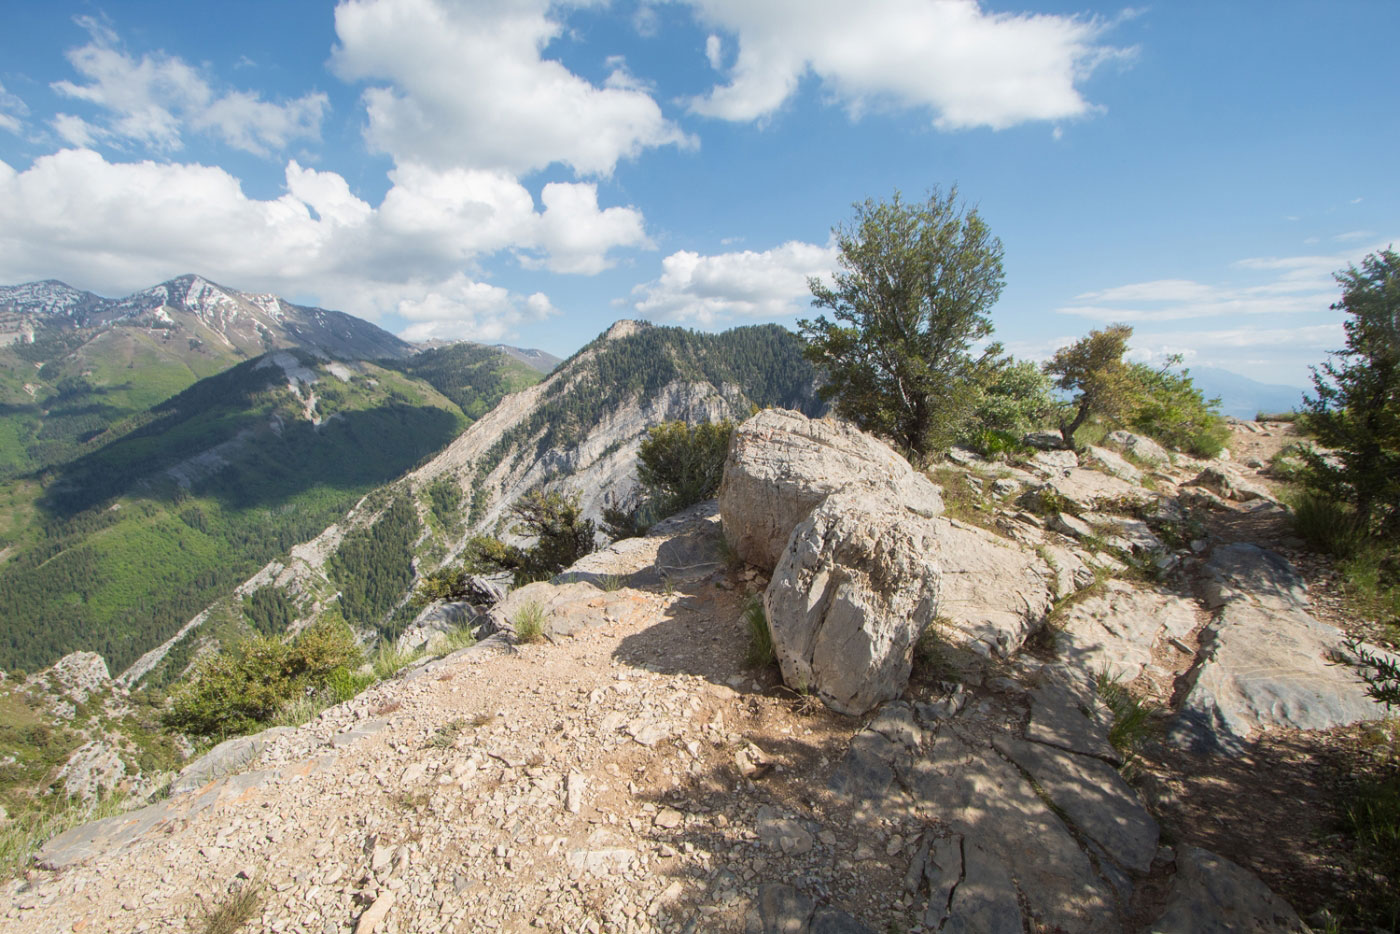 Hike Squaw Peak via Rock Canyon in Wasatch-Cache National Forest, Utah - Stav is Lost